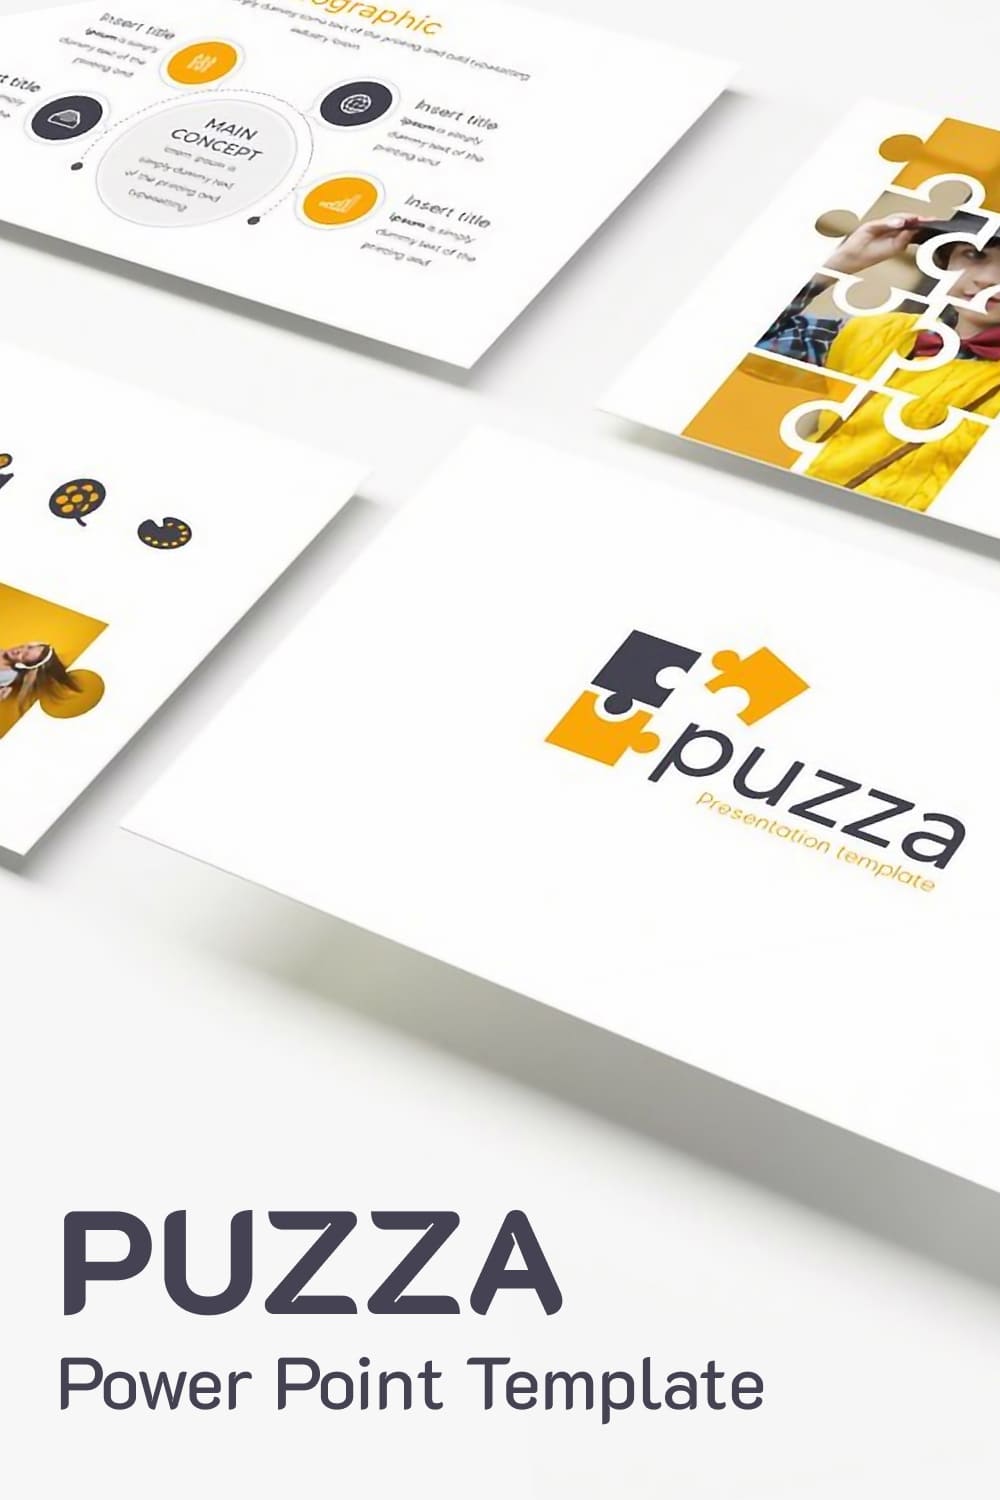 Puzza Powerpoint template, picture for Pinterest 1000x1500.